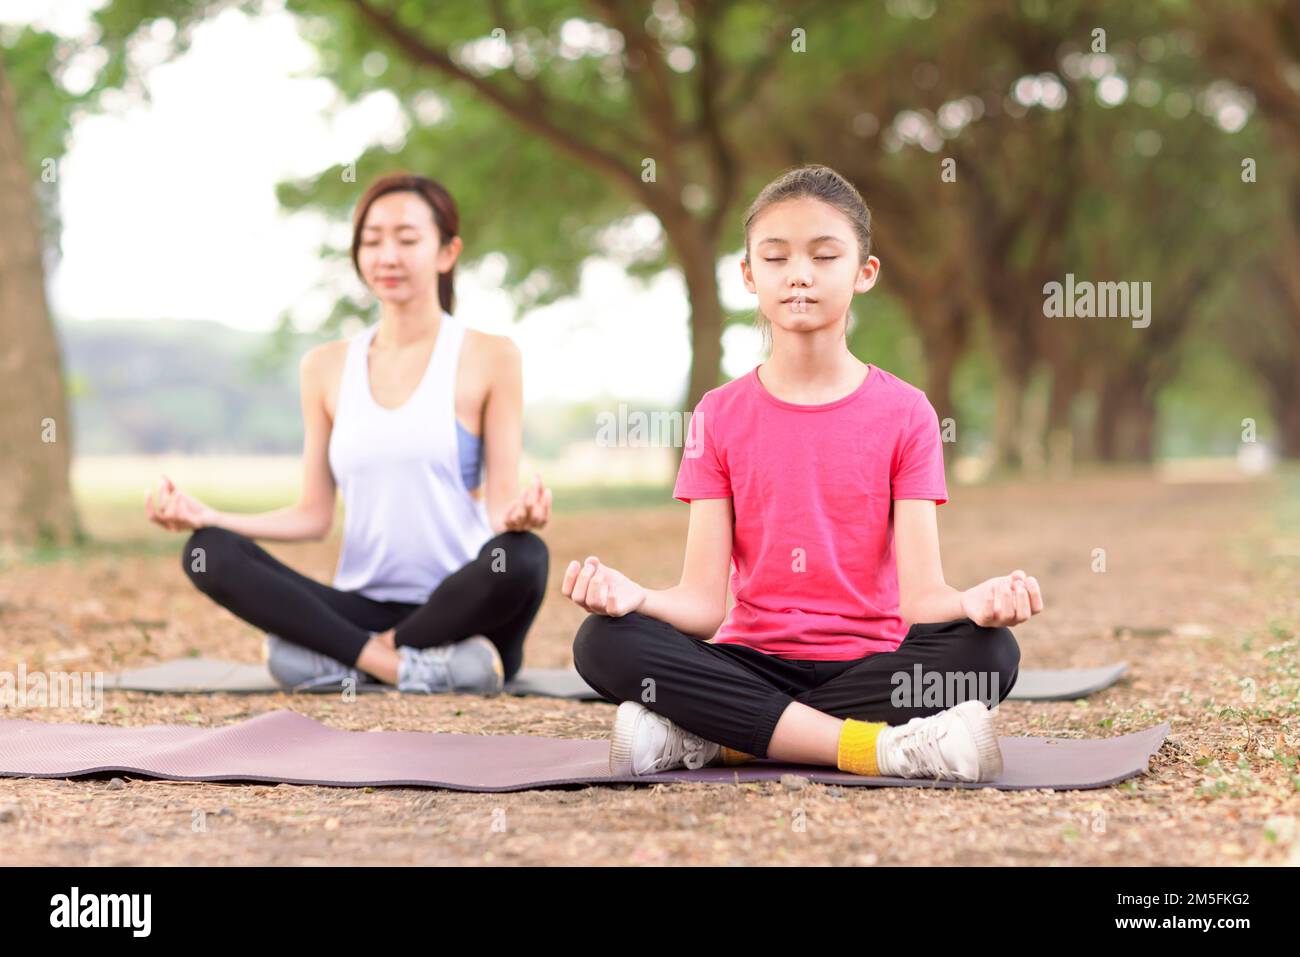 Mother and daughter doing yoga exercises on grass in the park Stock Photo